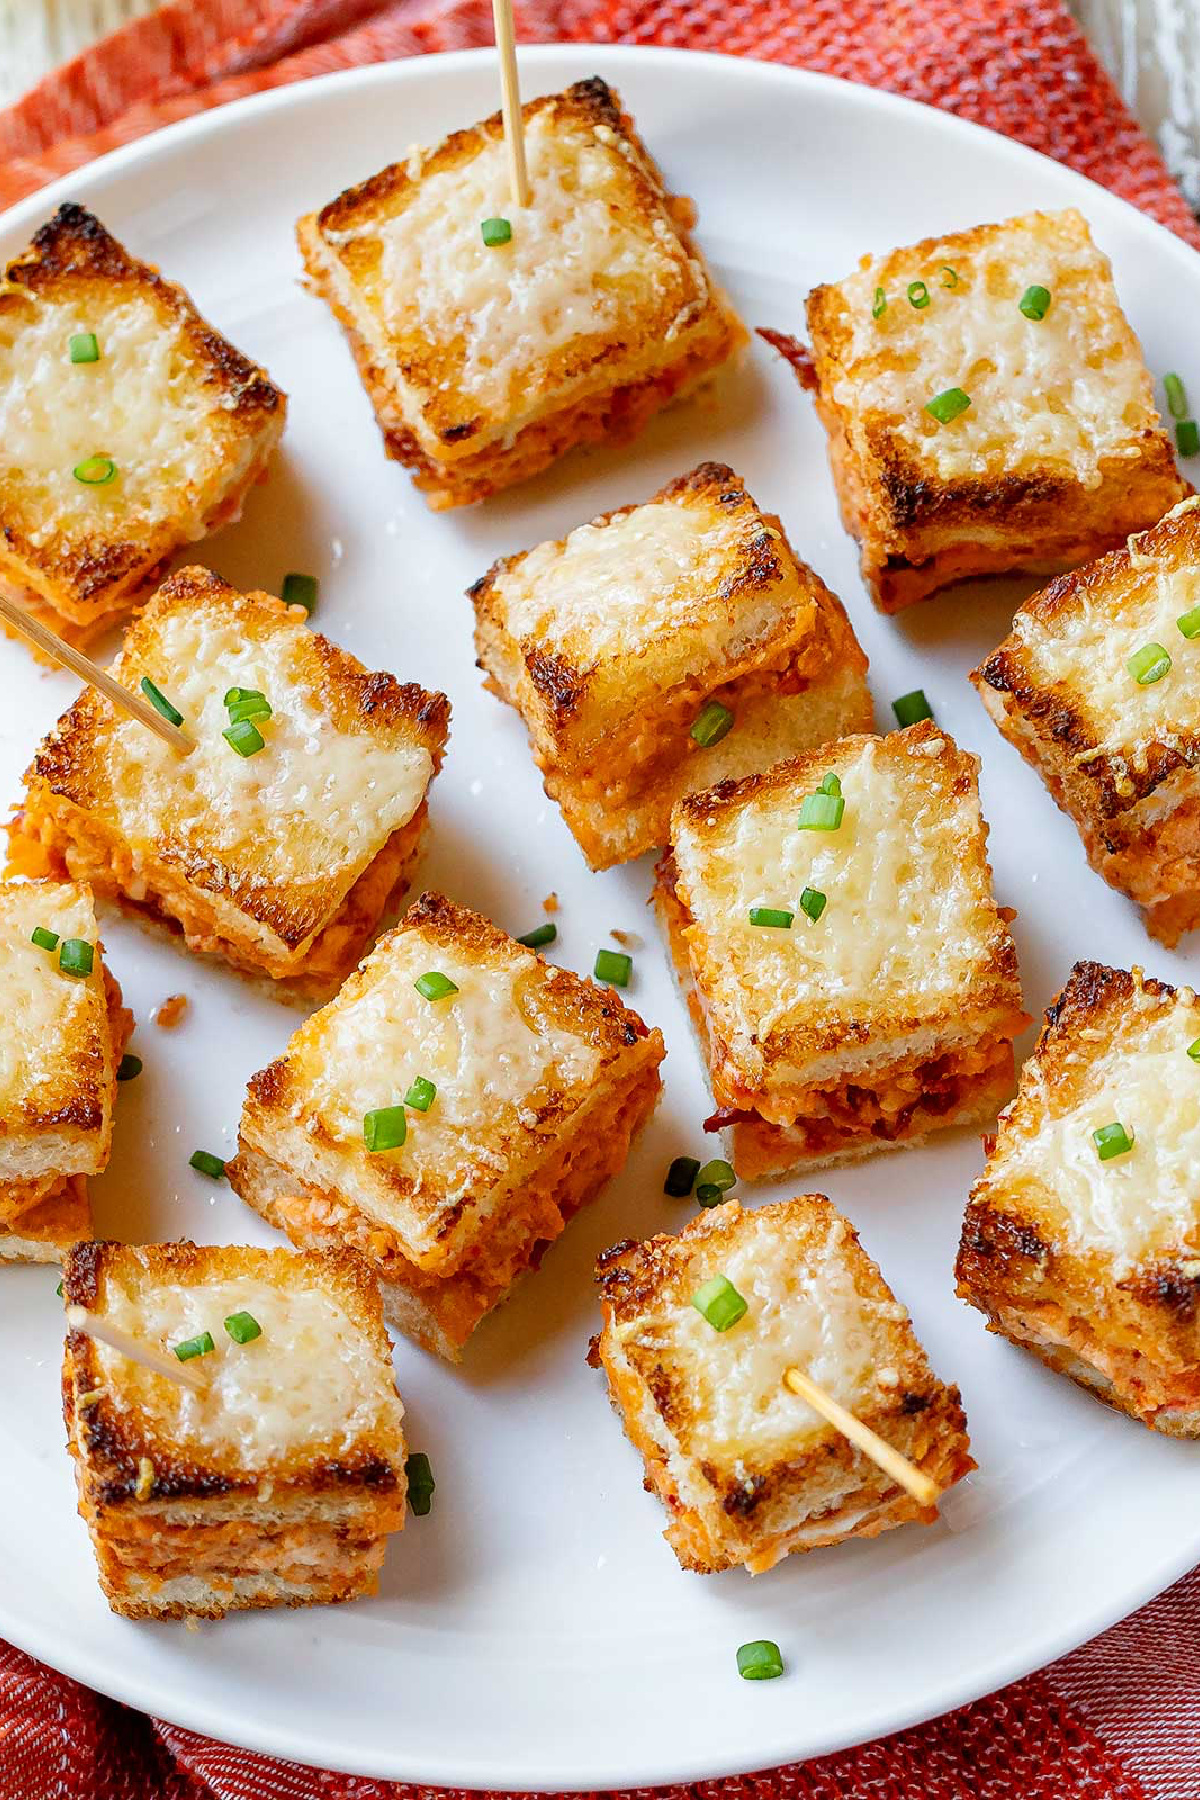 Cheap Party Food Ideas - Mini Grilled Cheese Sandwiches